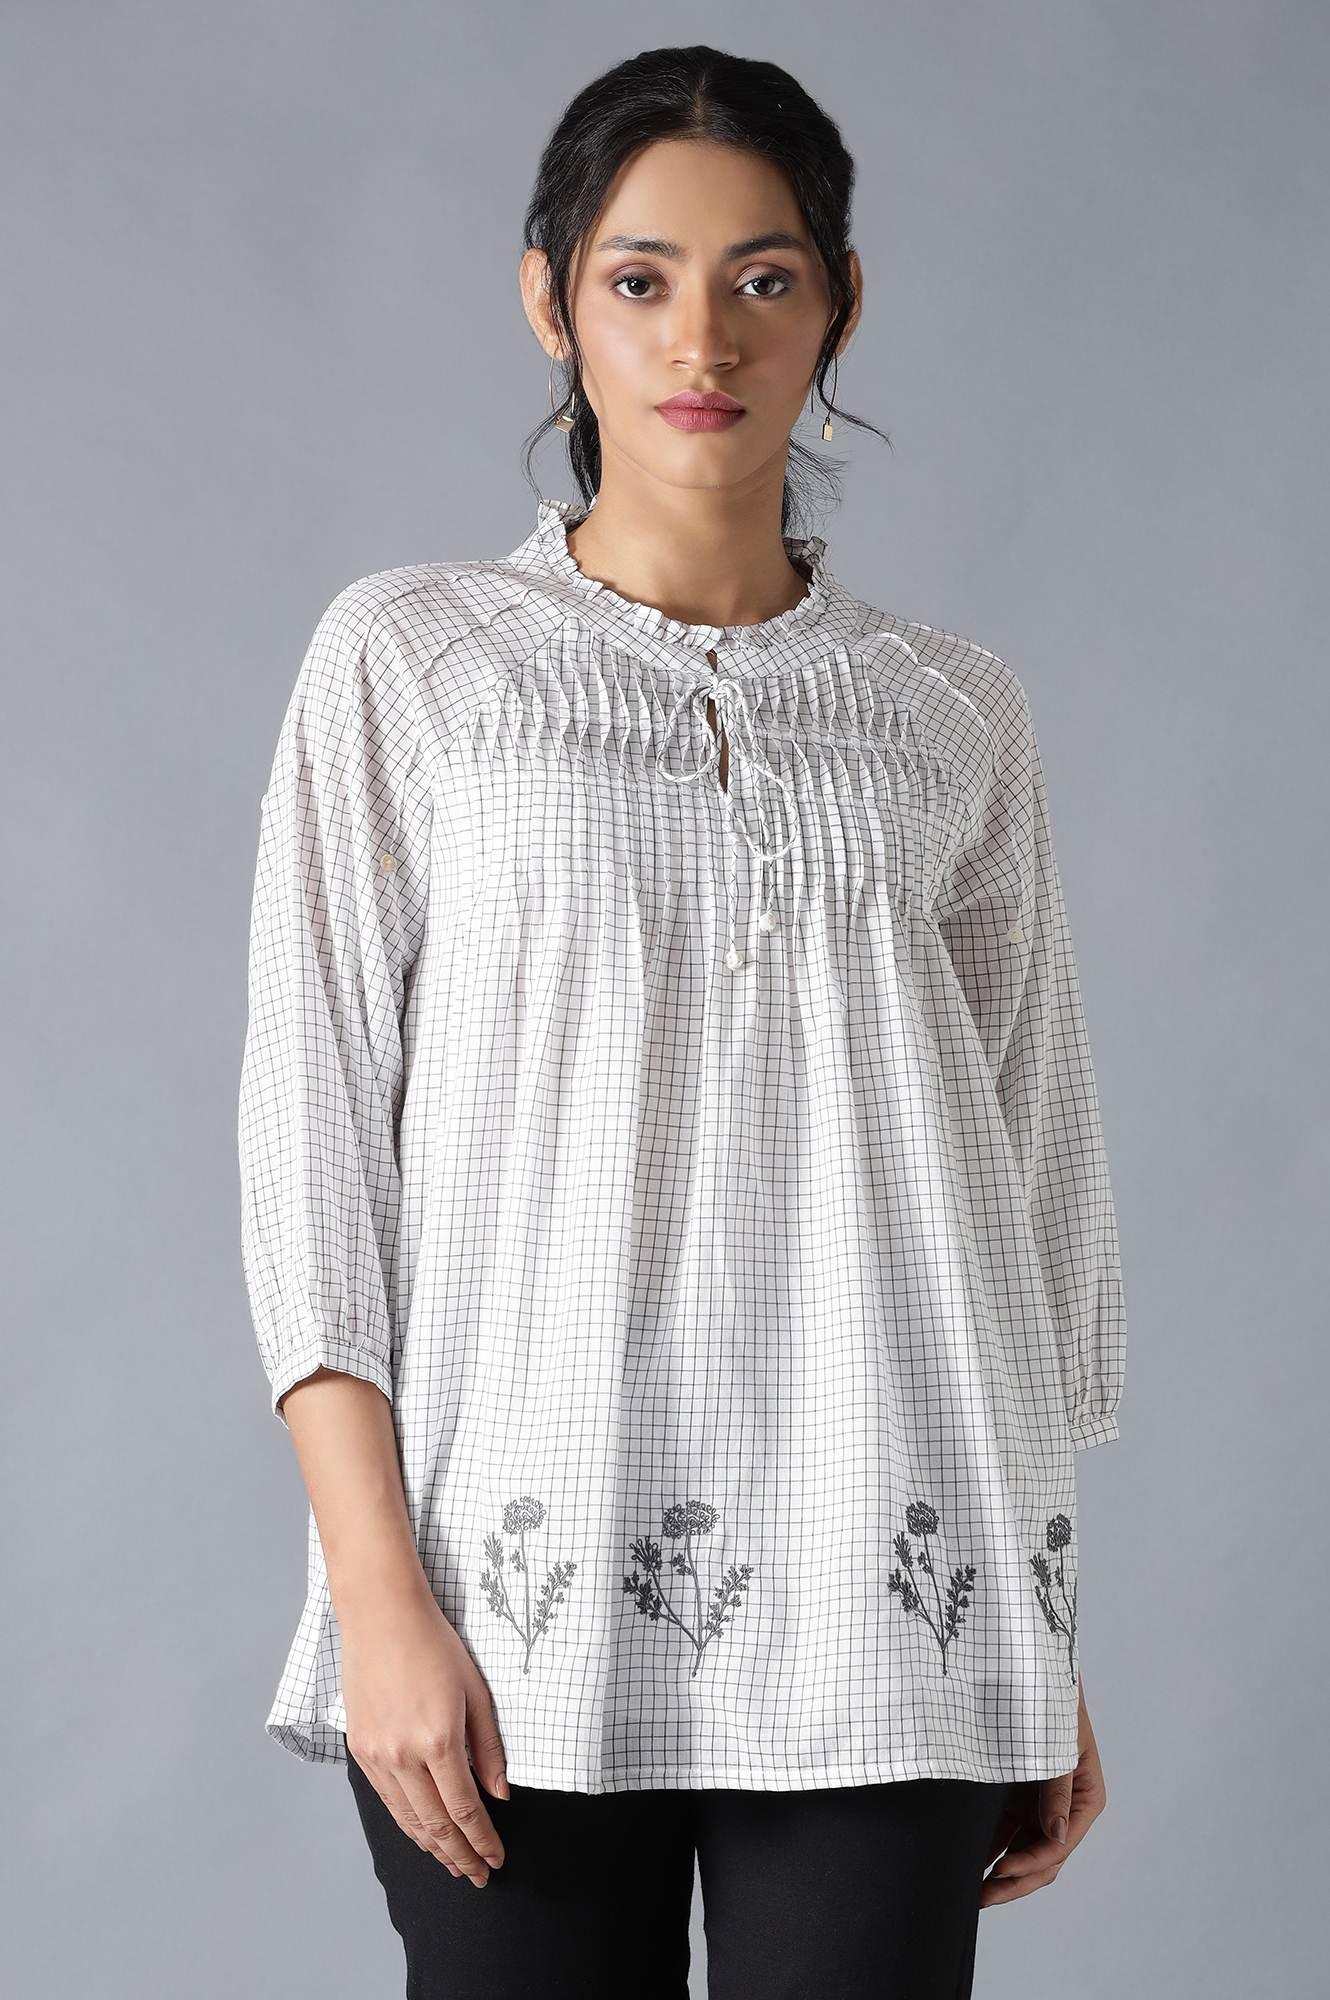 Ecru Cotton Dobby Top With Neck Tie And Embroidery - wforwoman